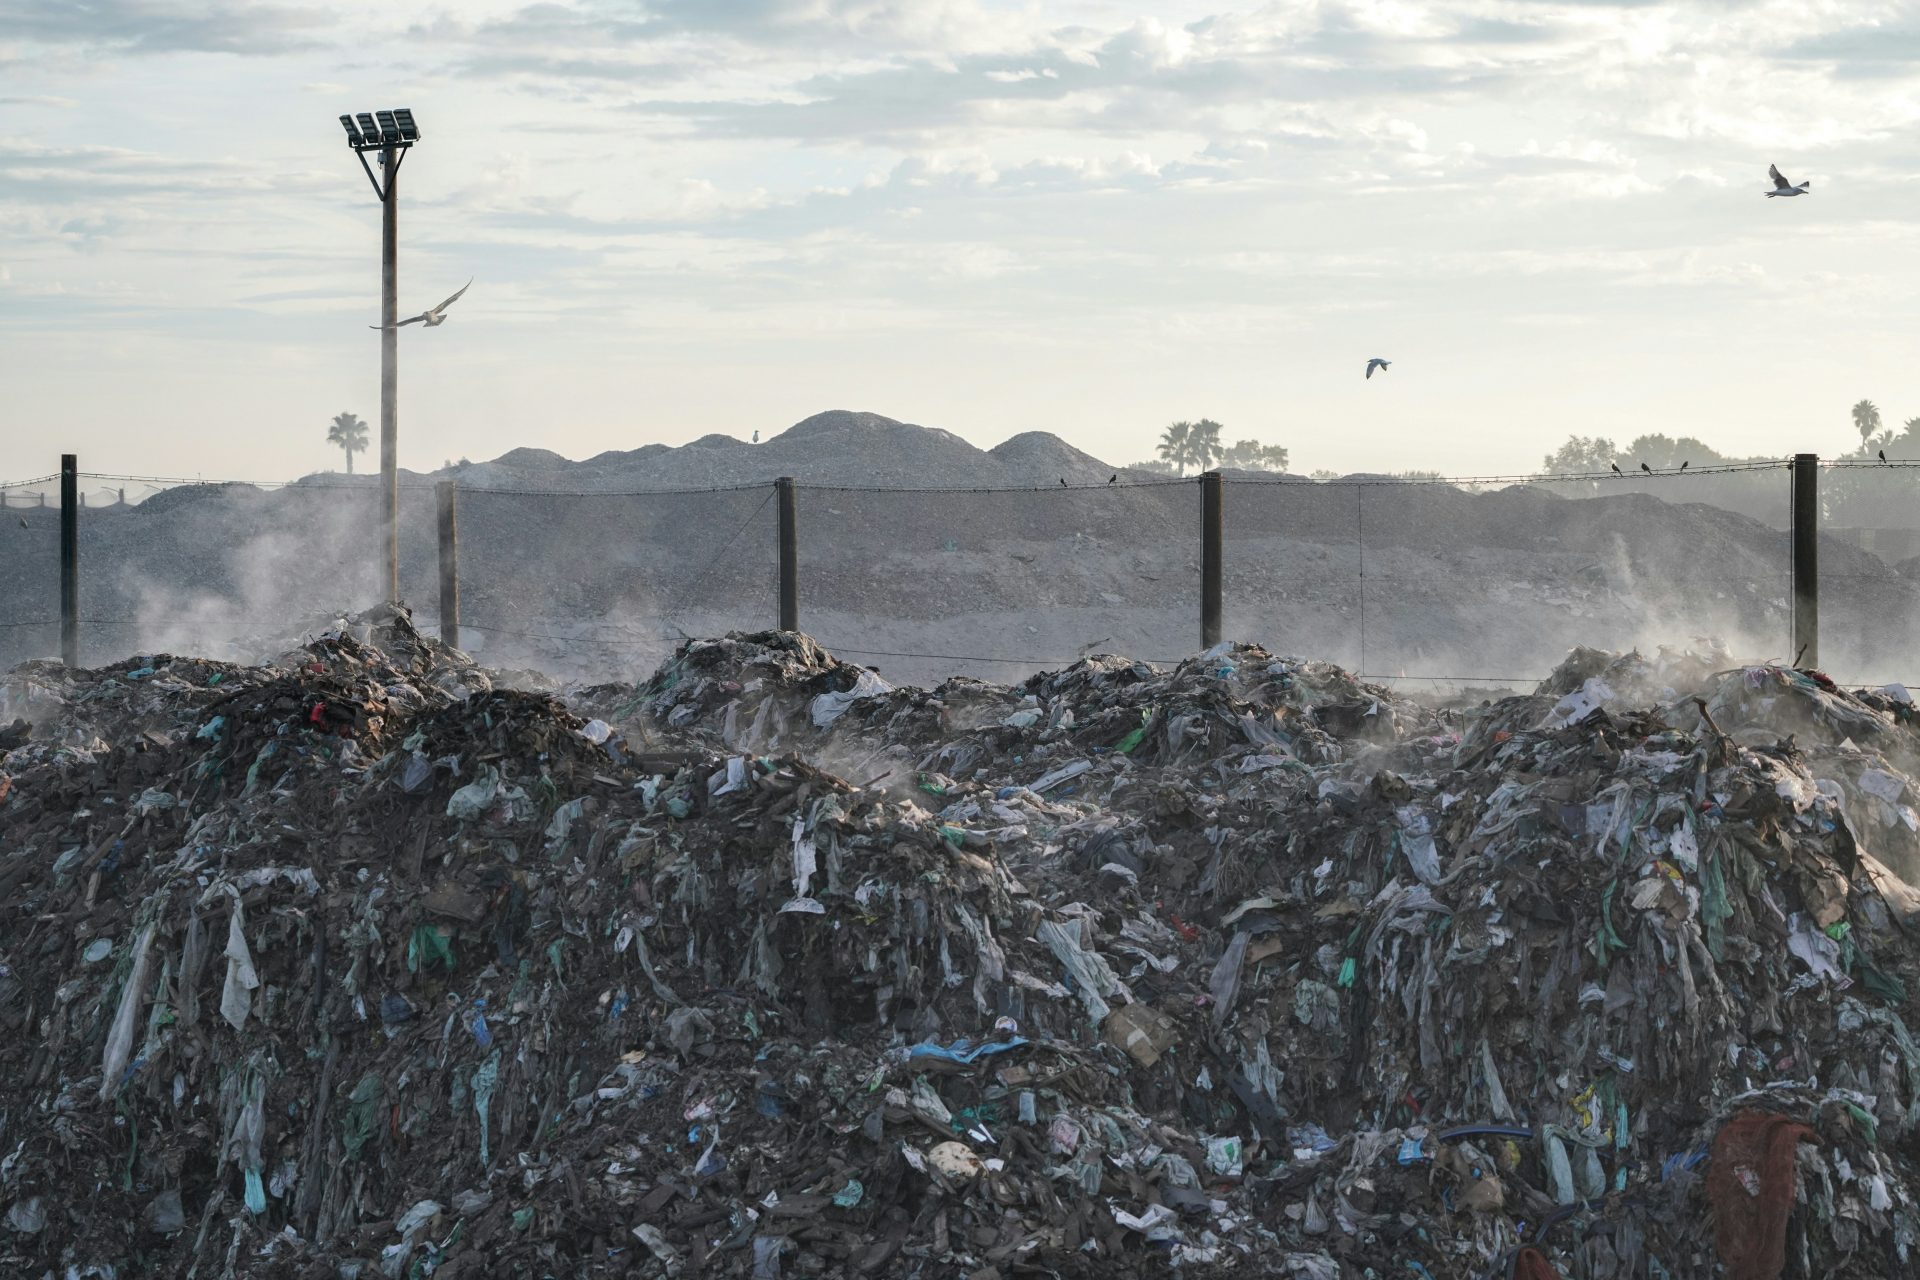 10% of returns worldwide end up in landfills